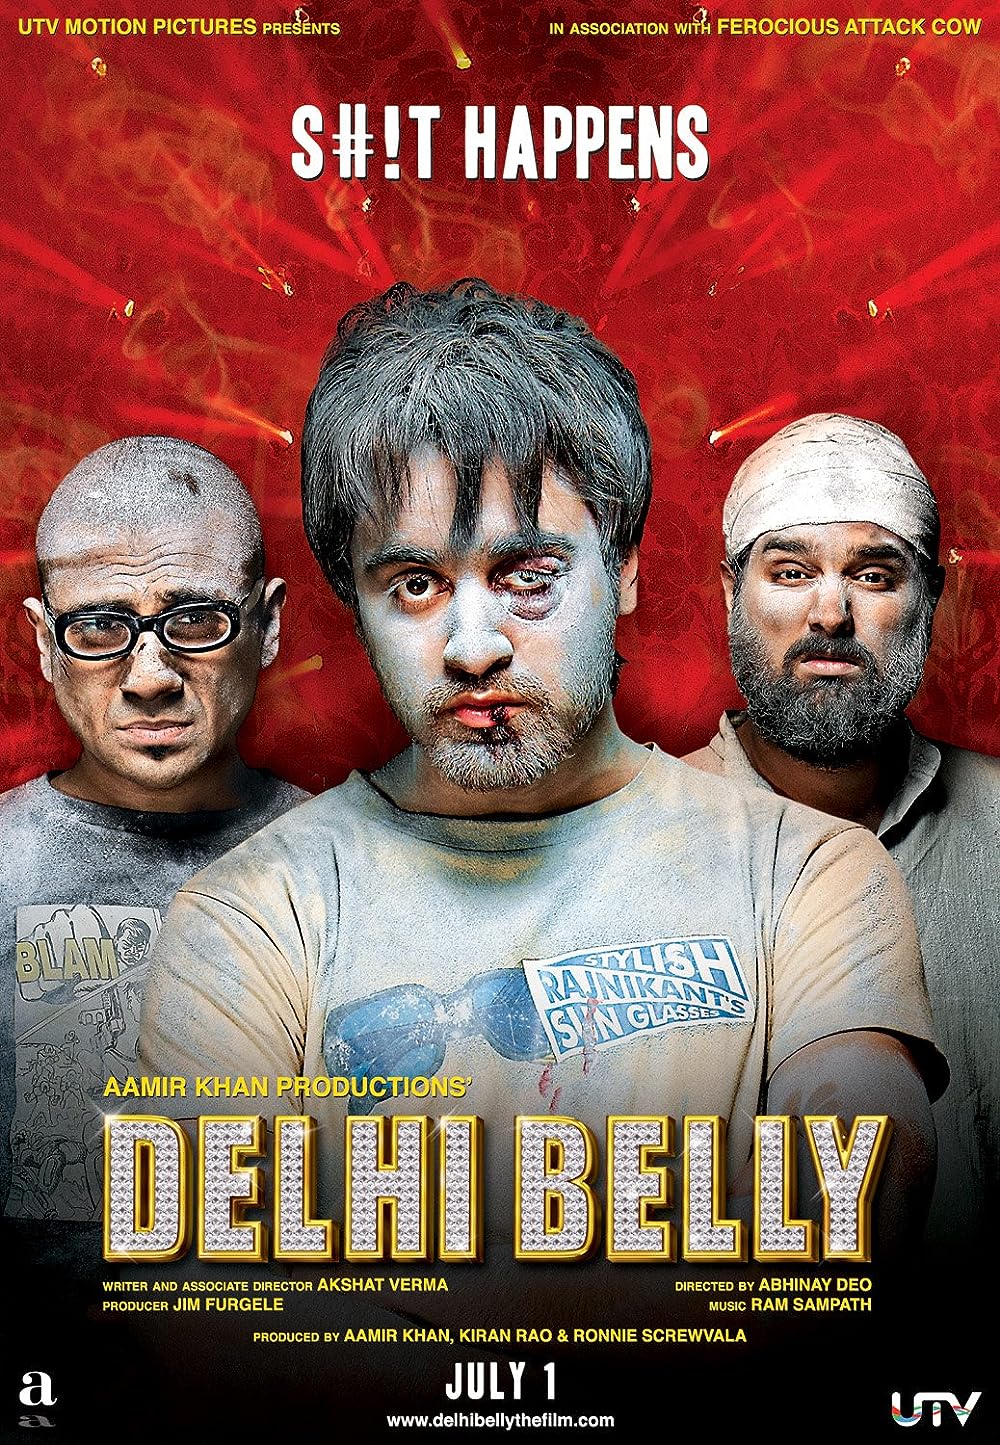 Delhi Belly- action movies on netflix